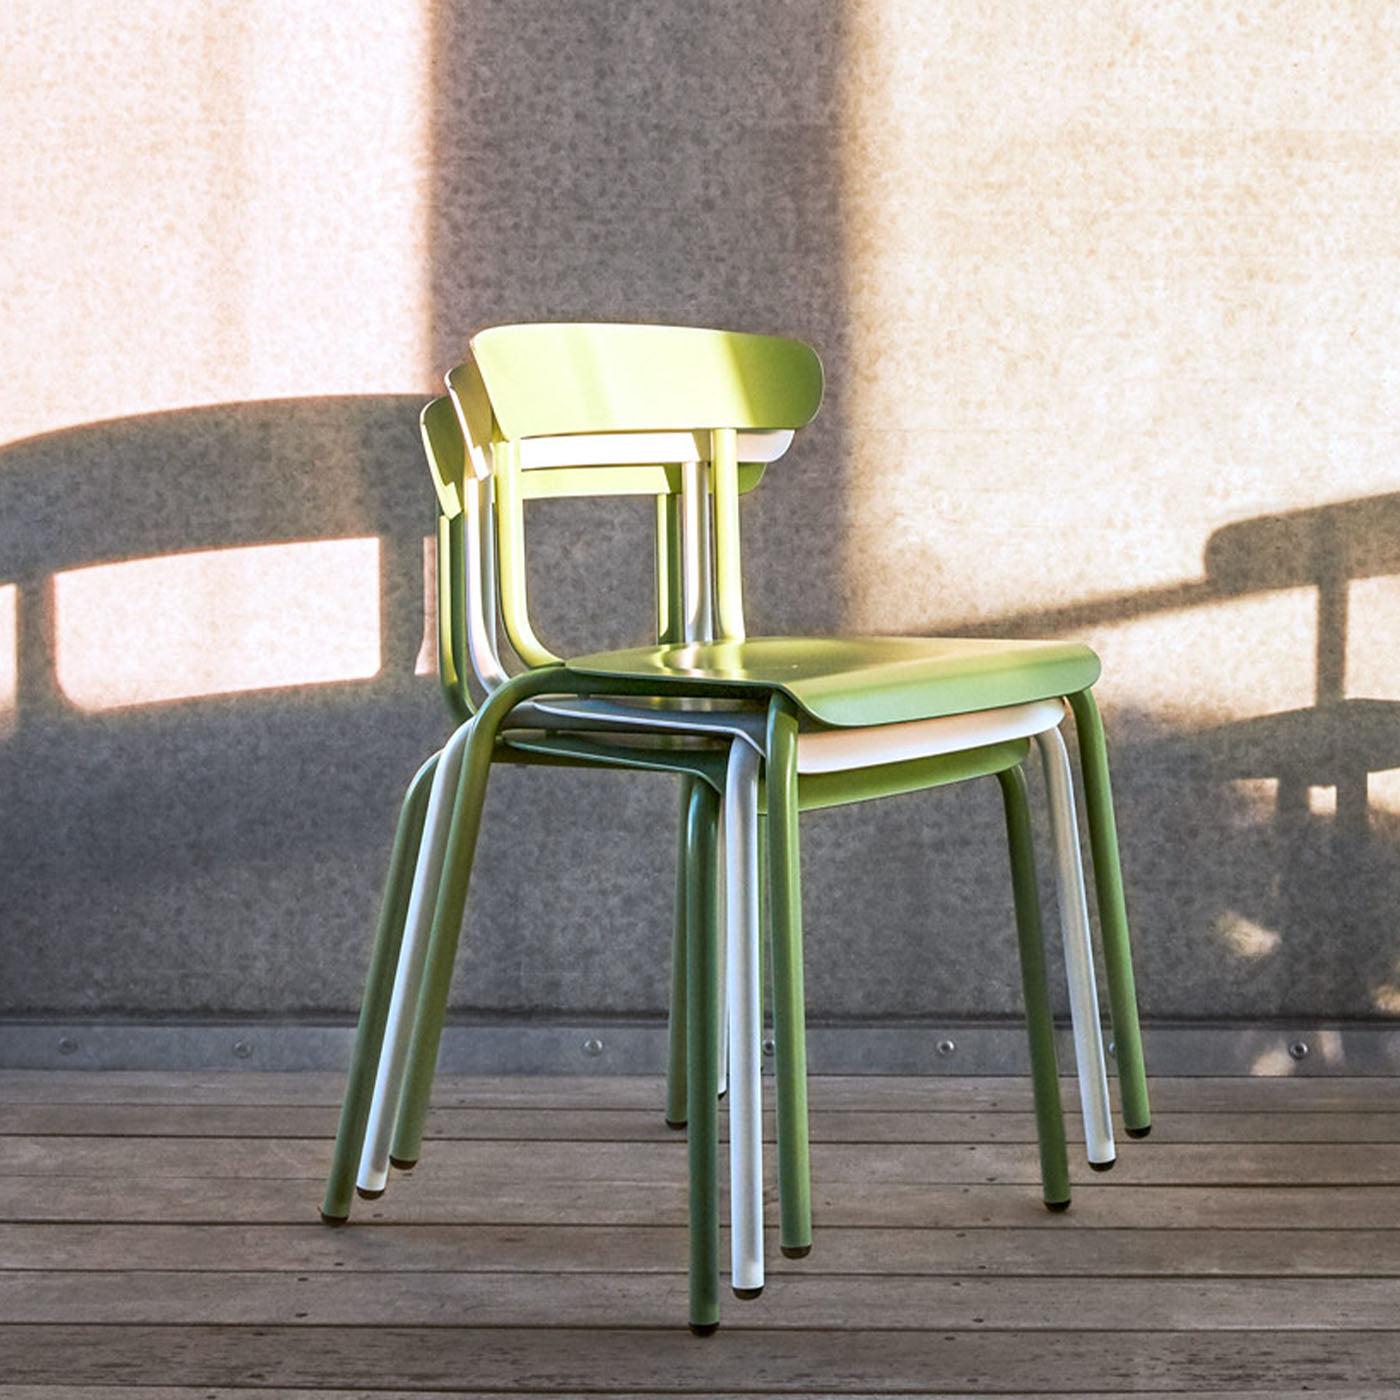 Olive Green AluMito Chair with Armrests by Pascal Bosetti - Alternative view 1